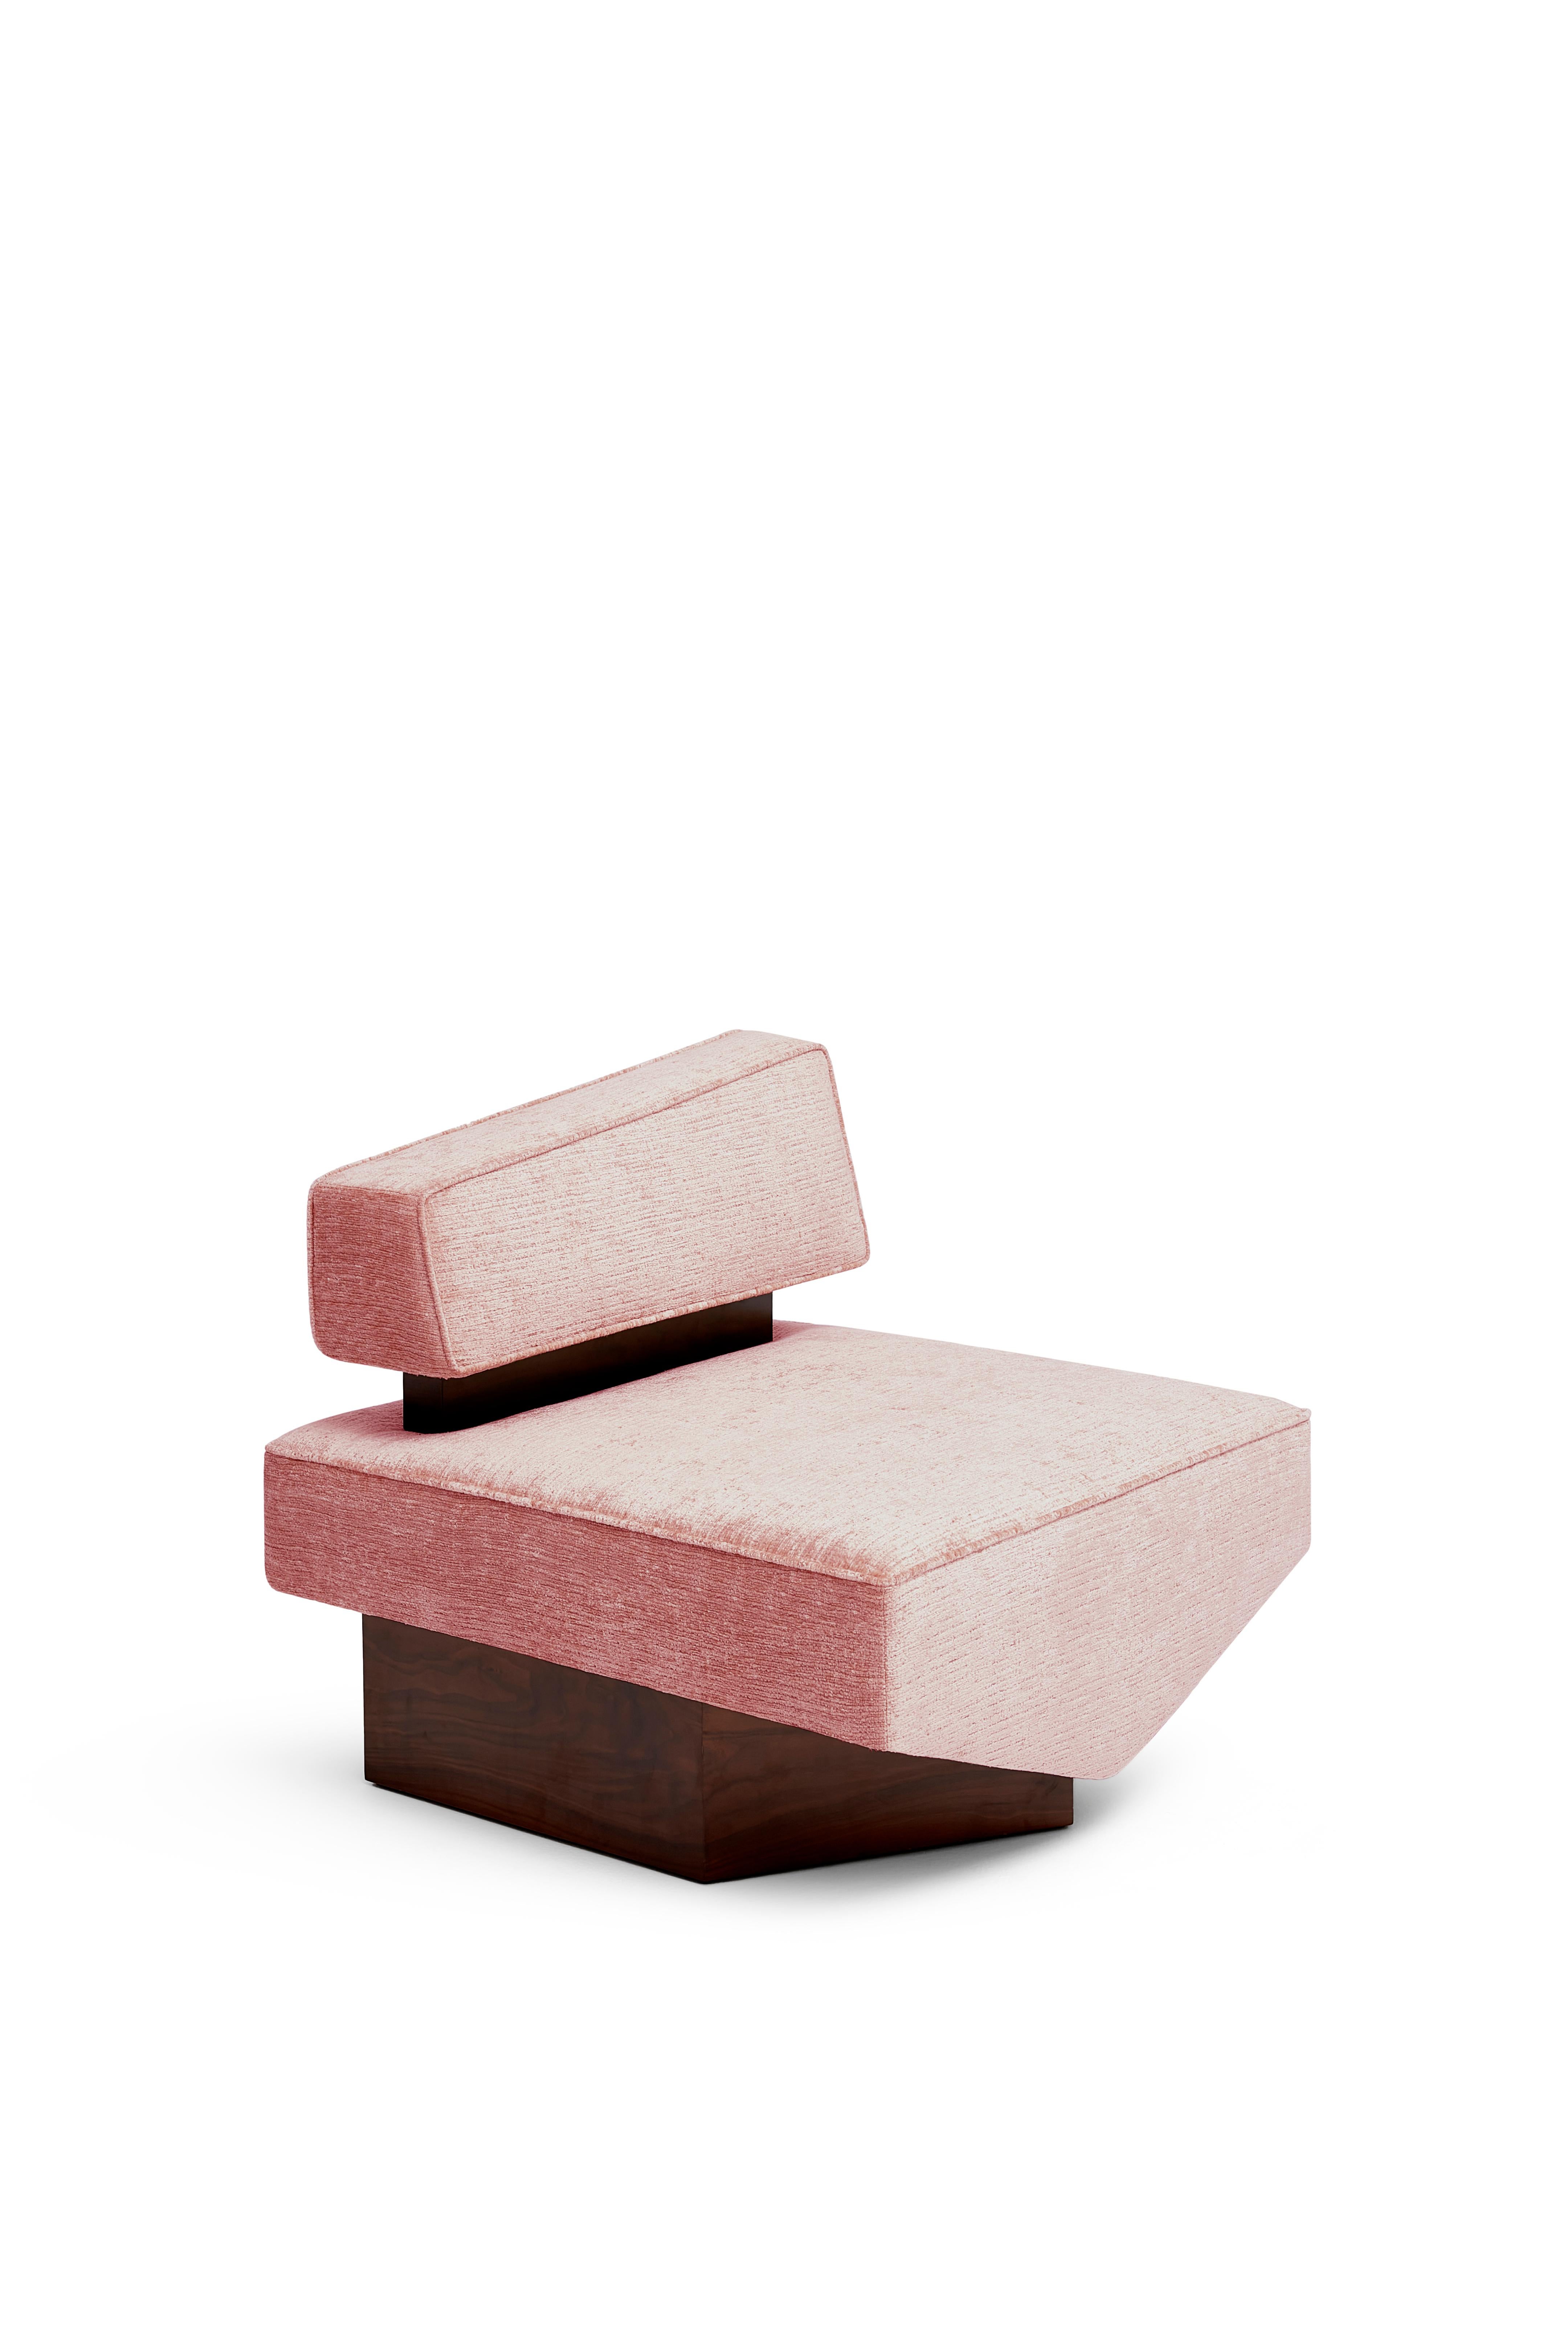 Divergent armchair by Marta Delgado Studio

Fabric: Vintage 
Color: Pink (more colors available)
Wood: American walnut veener

Dimensions:
Width: 31.5” 80 cm 
Depth: 32.7” 83 cm 
Height: 29.1” 74 cm
Seat height: 15.7” 40 cm

Marta